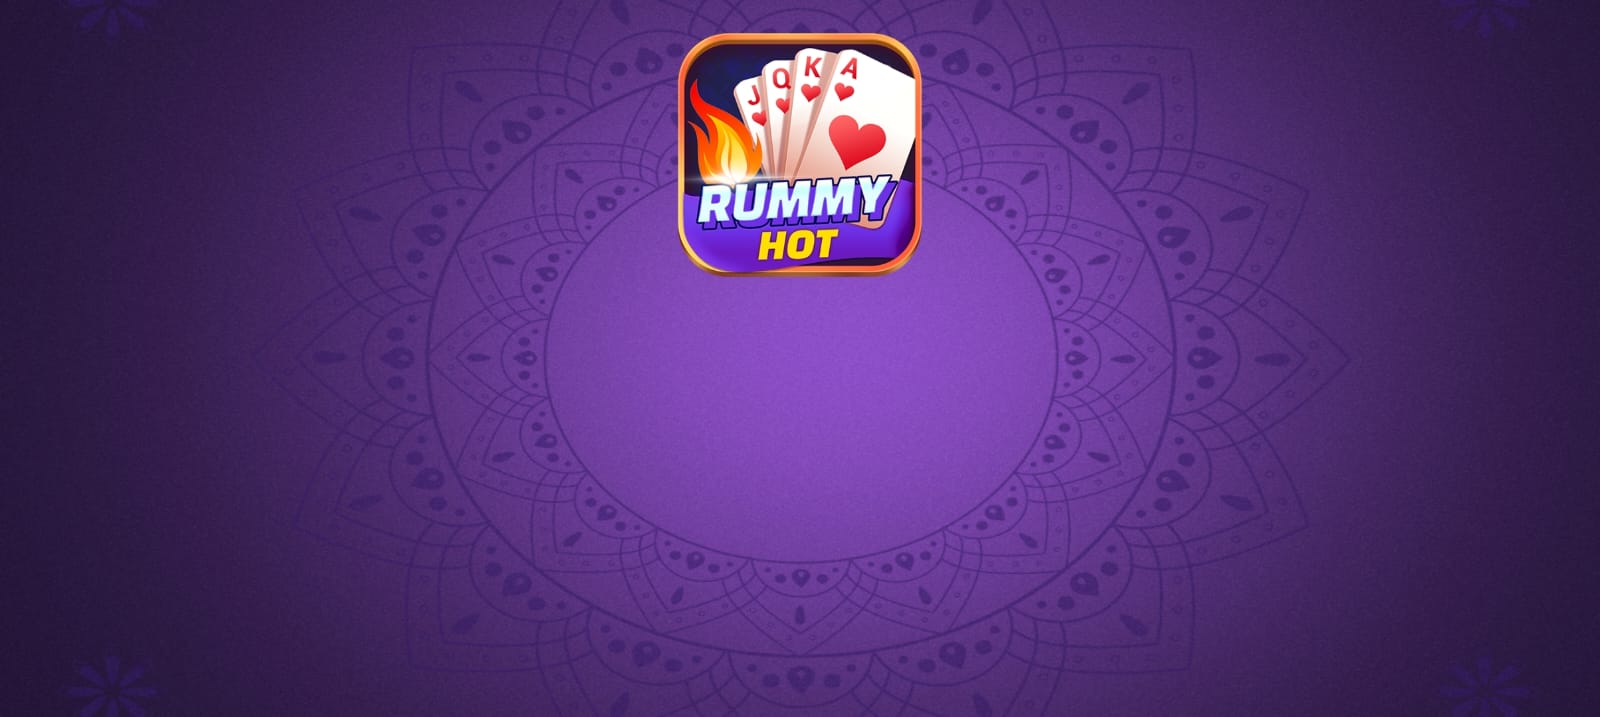 Create Account In Rummy Hot Application